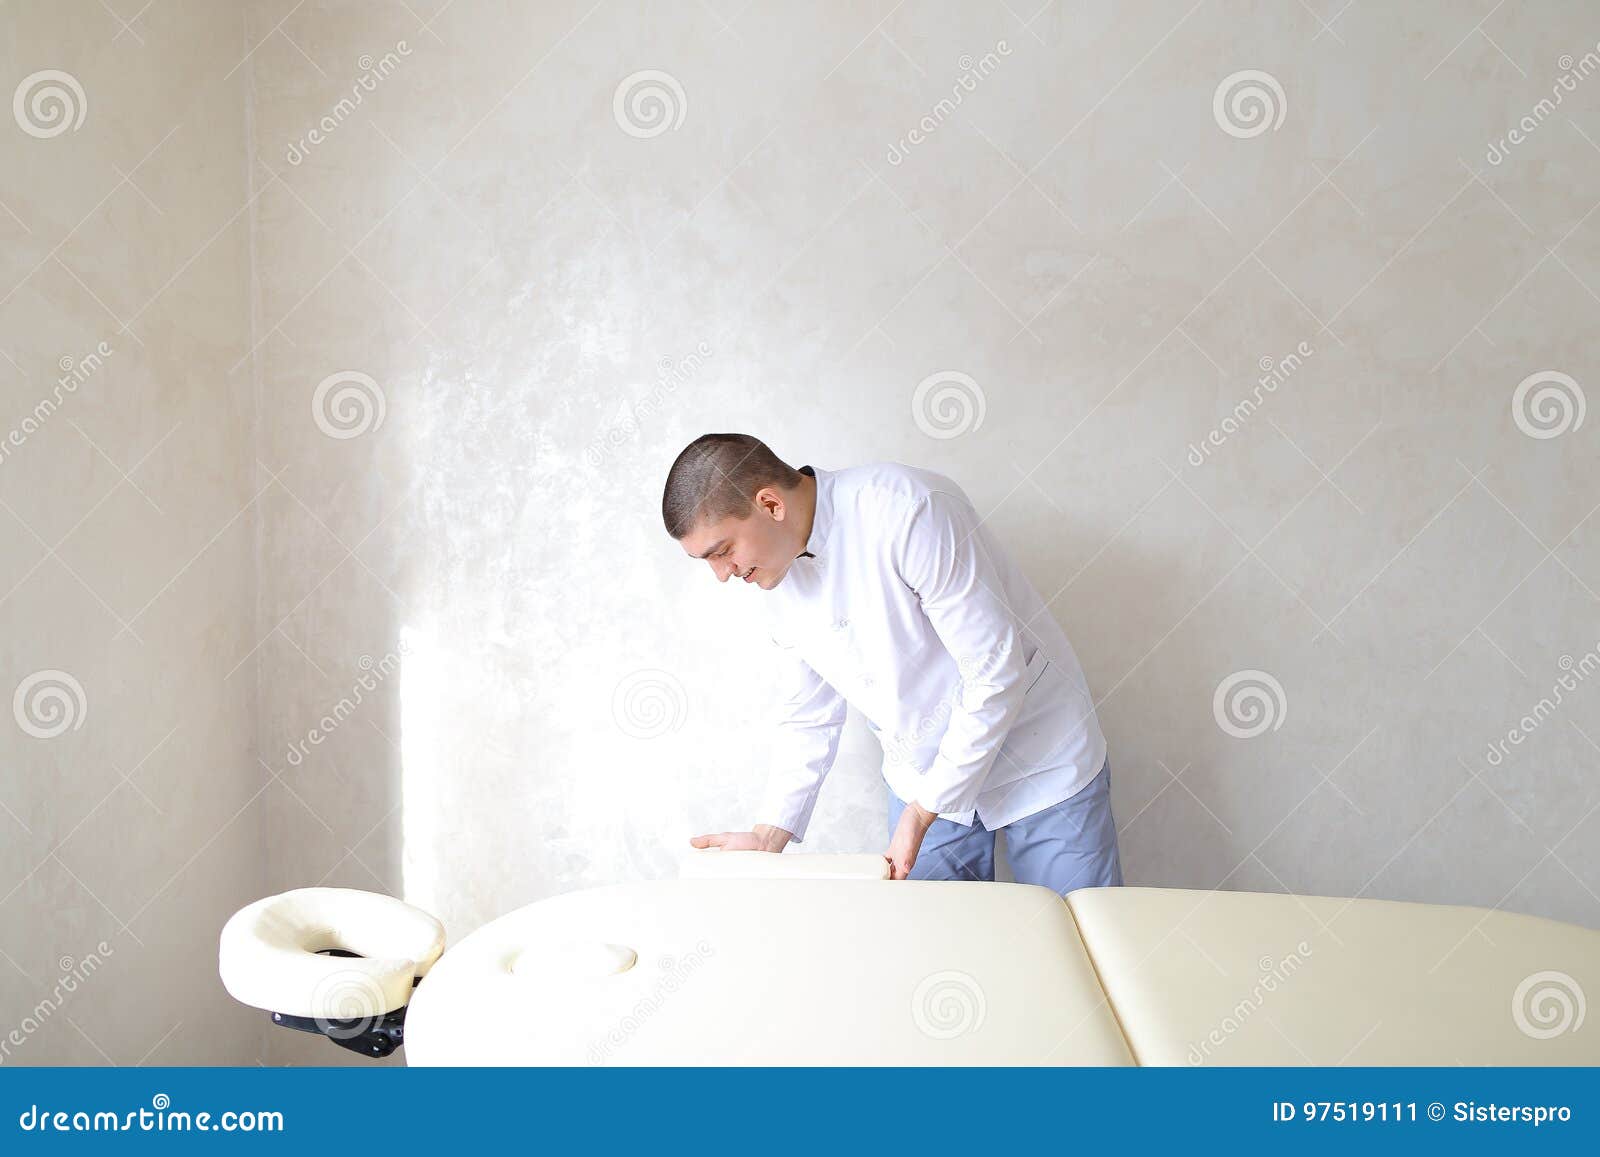 Professional Male Massage Therapist Preparing To Receive Patient Stock Image Image Of Interior